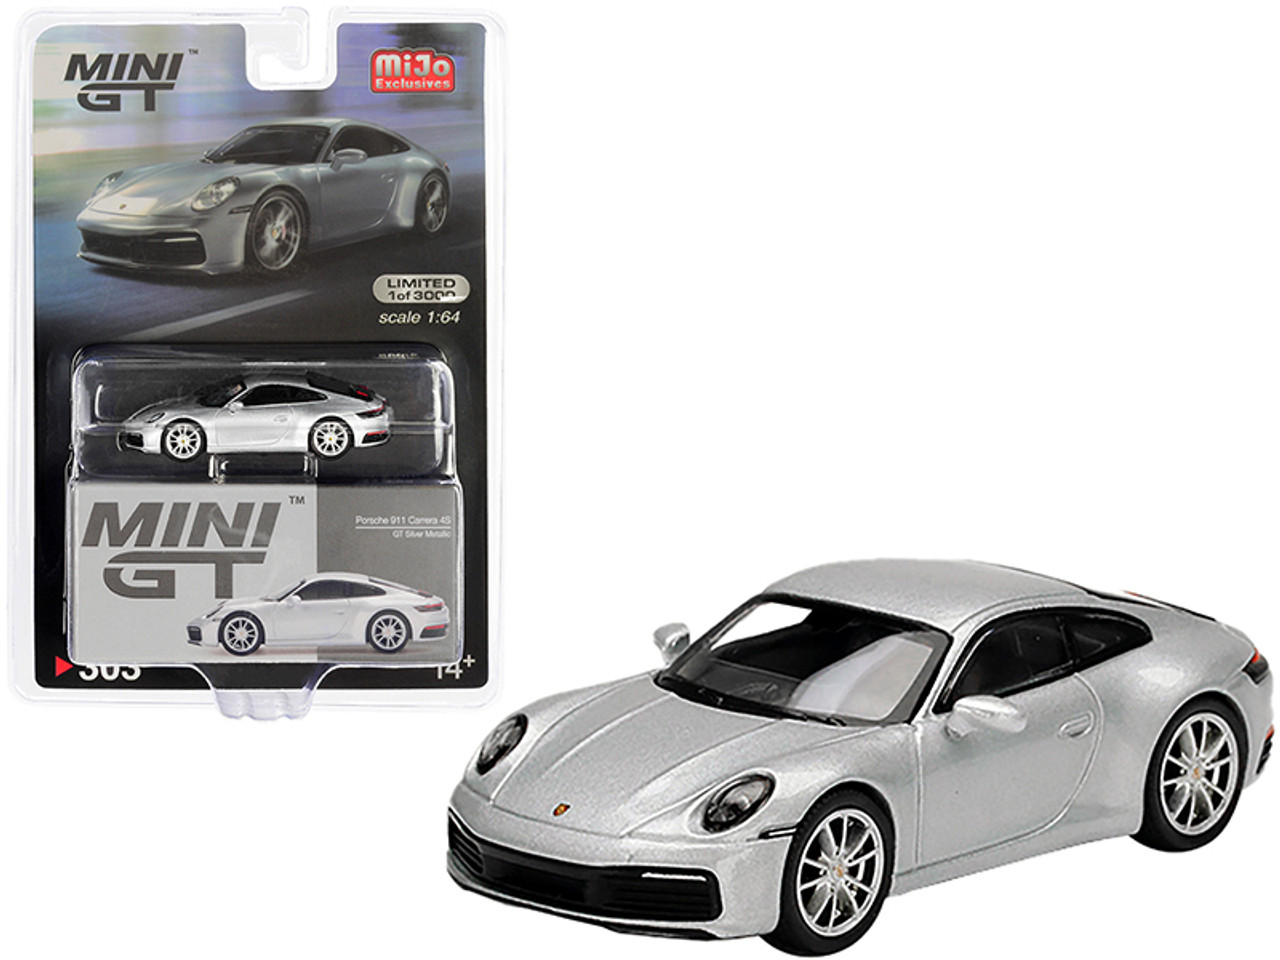 Porsche 911 Carrera 4S LHD GT Silver Metallic Limited Edition to 3000 pieces Worldwide 1/64 Diecast Model Car by True Scale Miniatures